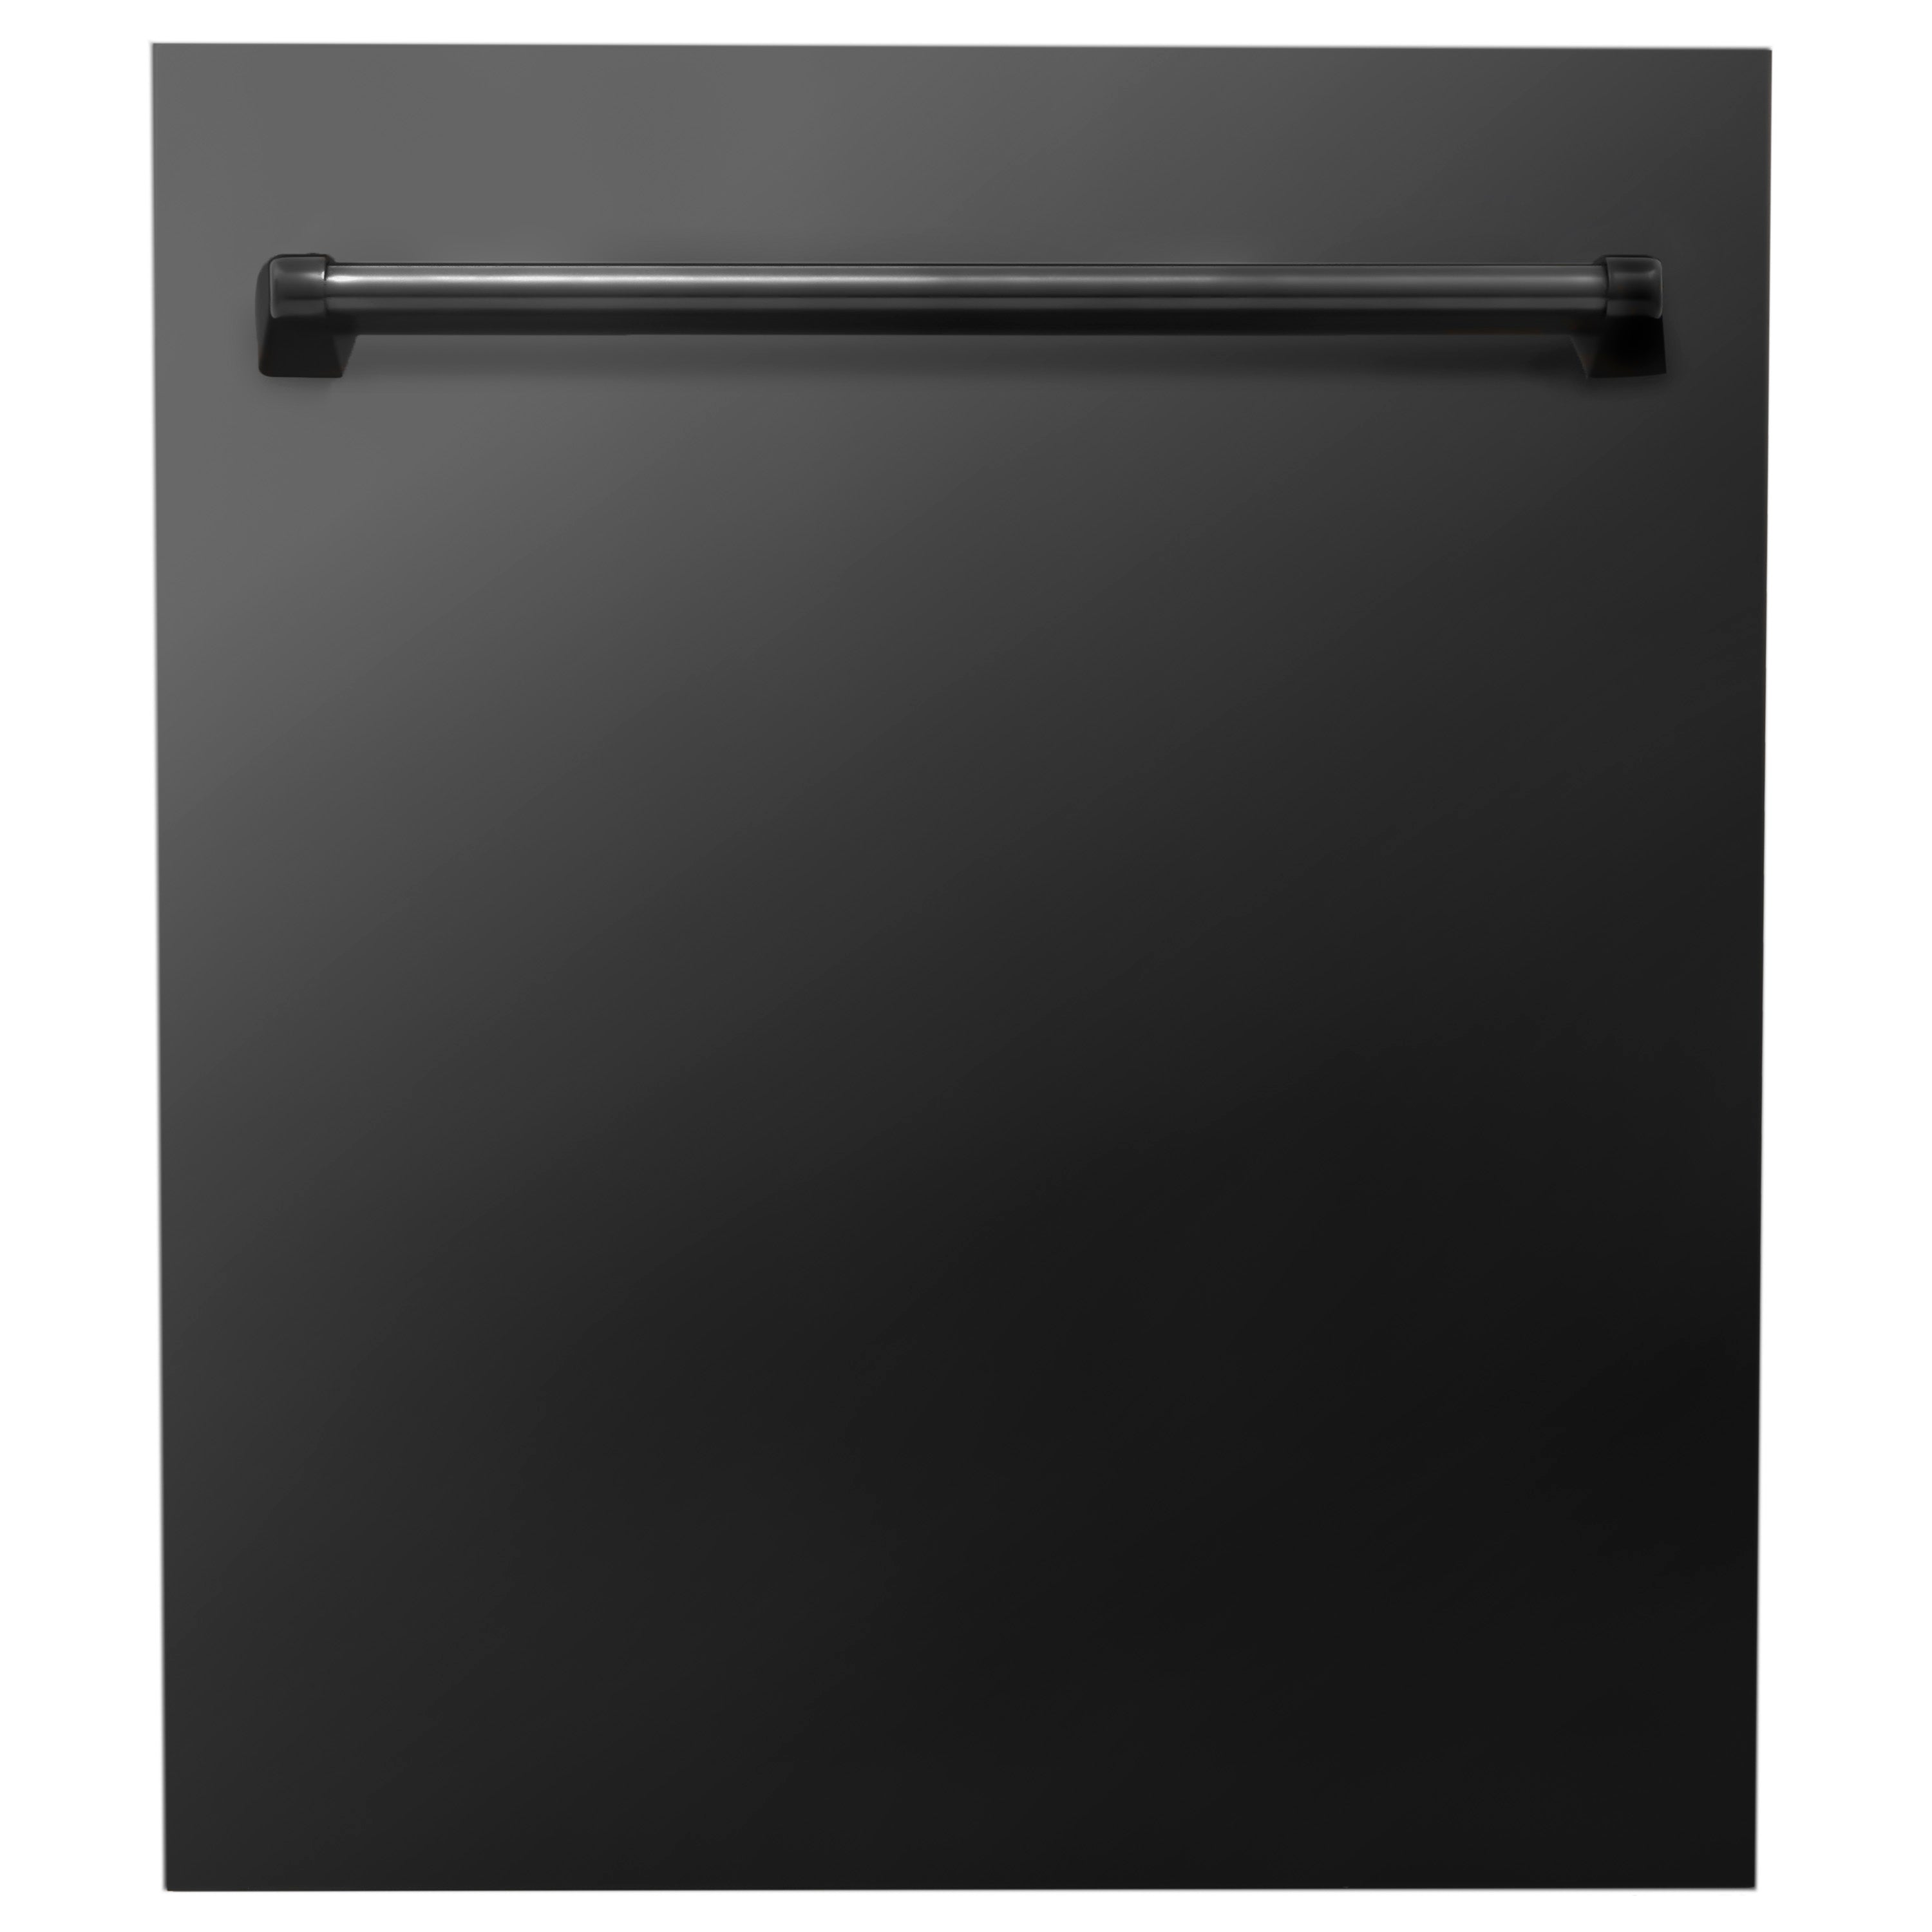 ZLINE 24" Dishwasher Panel in Black Stainless Steel with Traditional Handle (DP-BS-24)